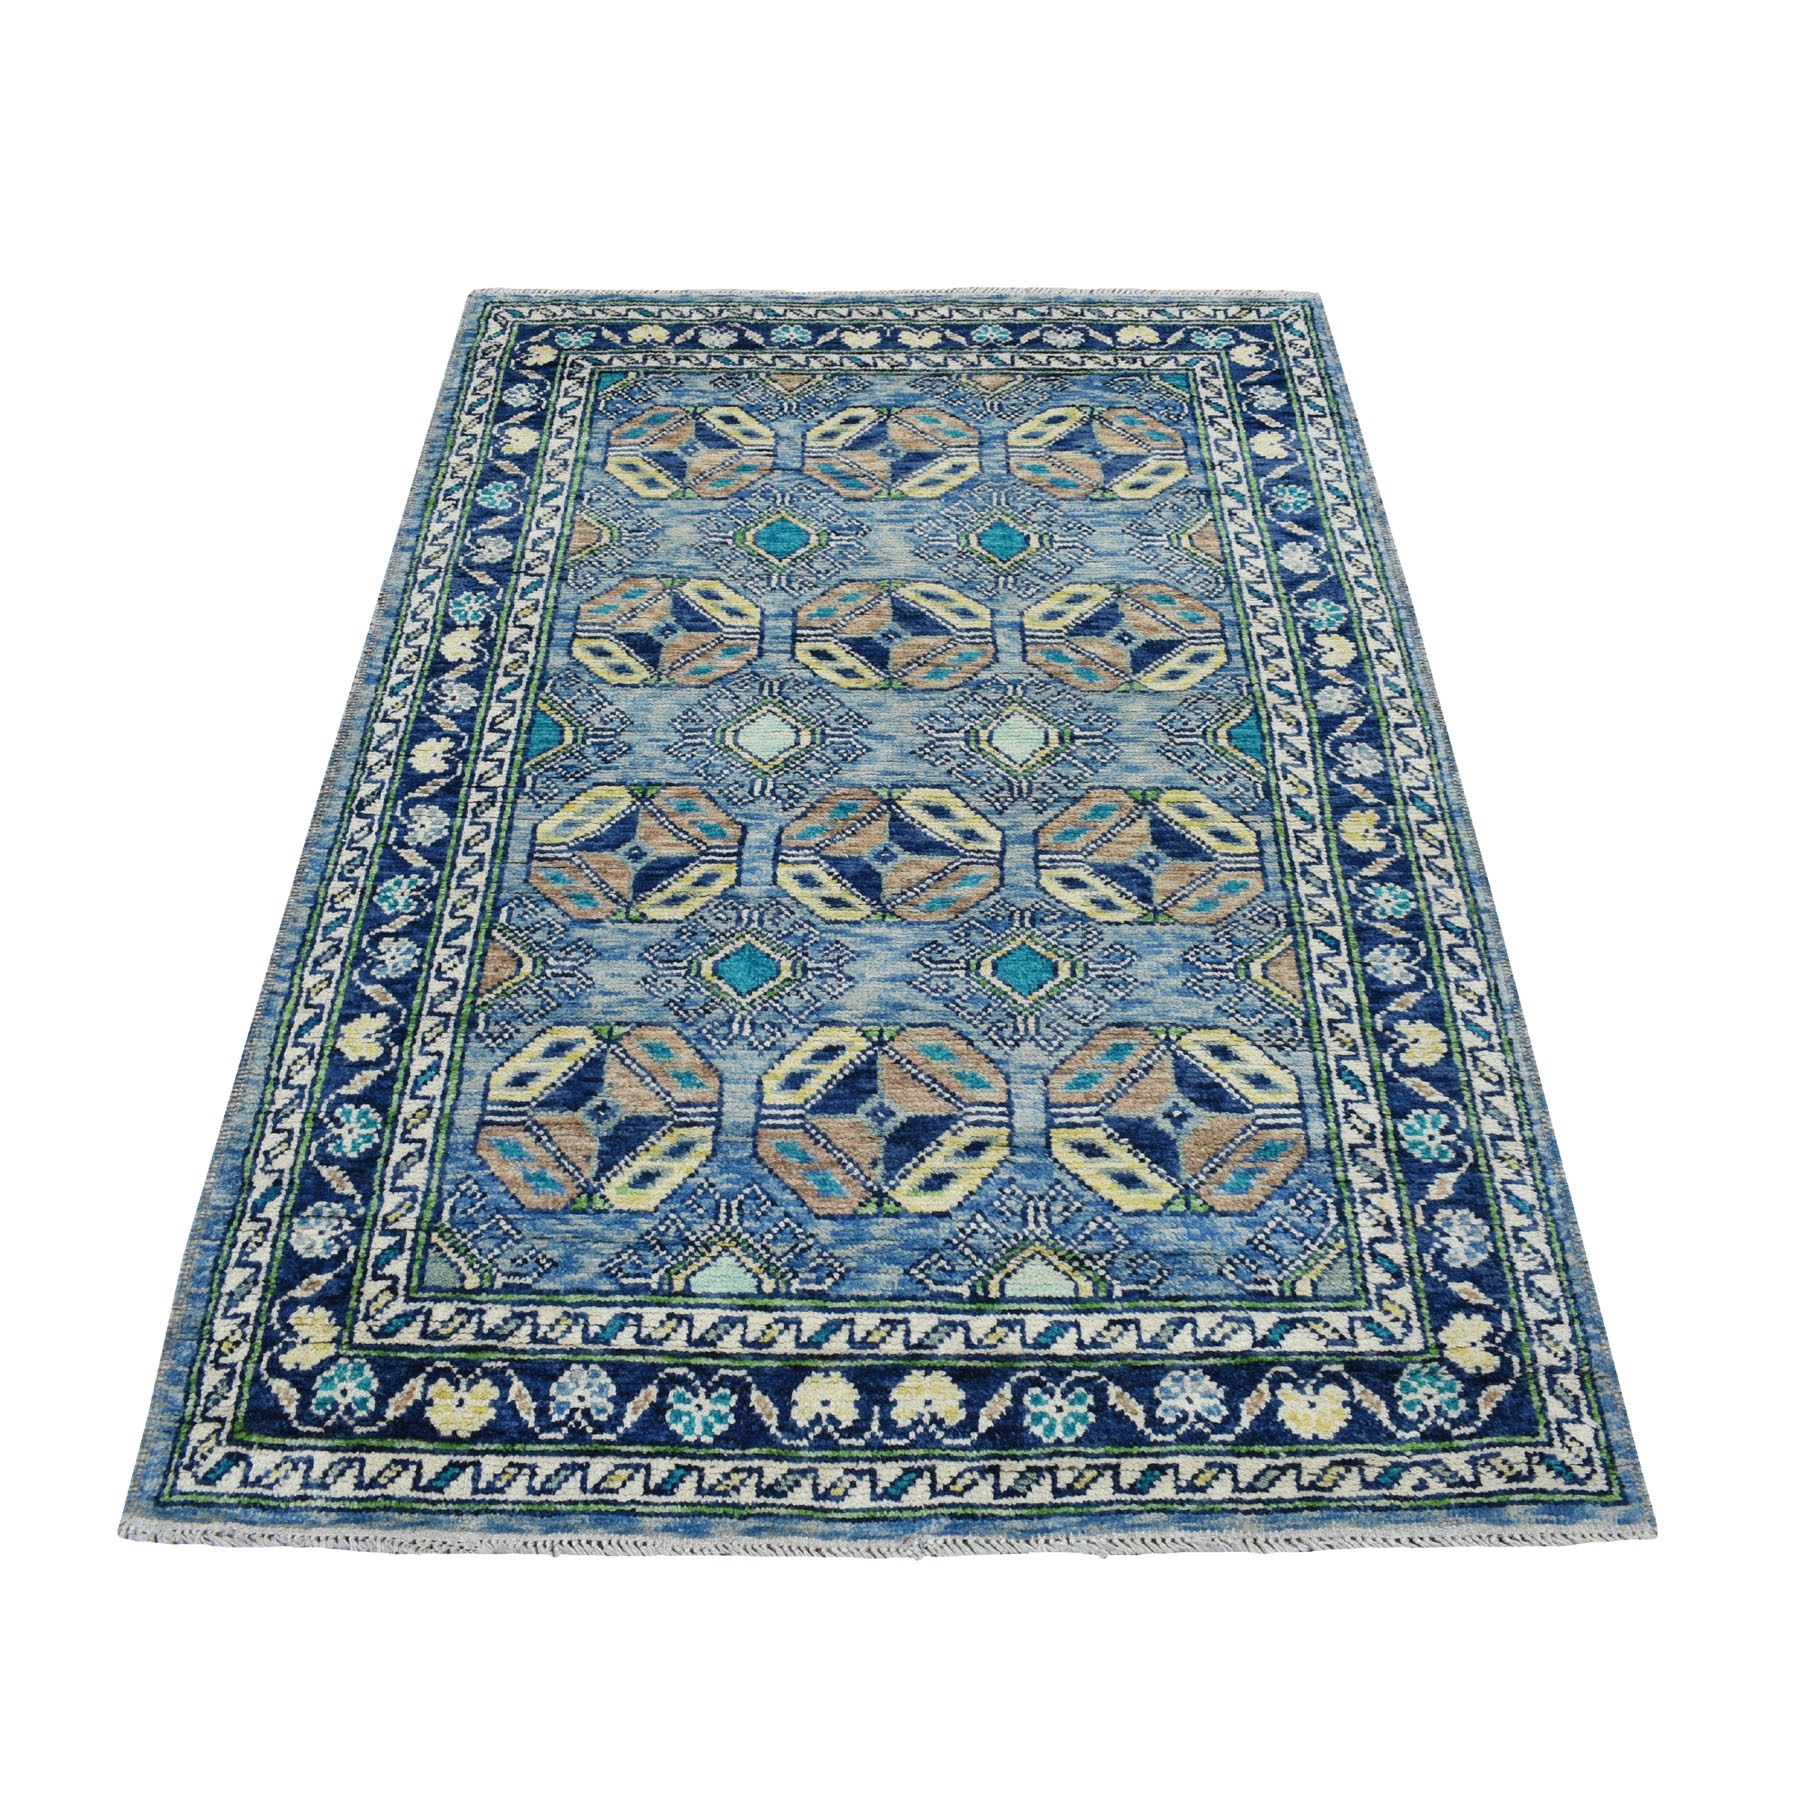 4'1"X6' Blue Tribal Design Hand Knotted Colorful Afghan Baluch Pure Wool Oriental Rug moaeccae